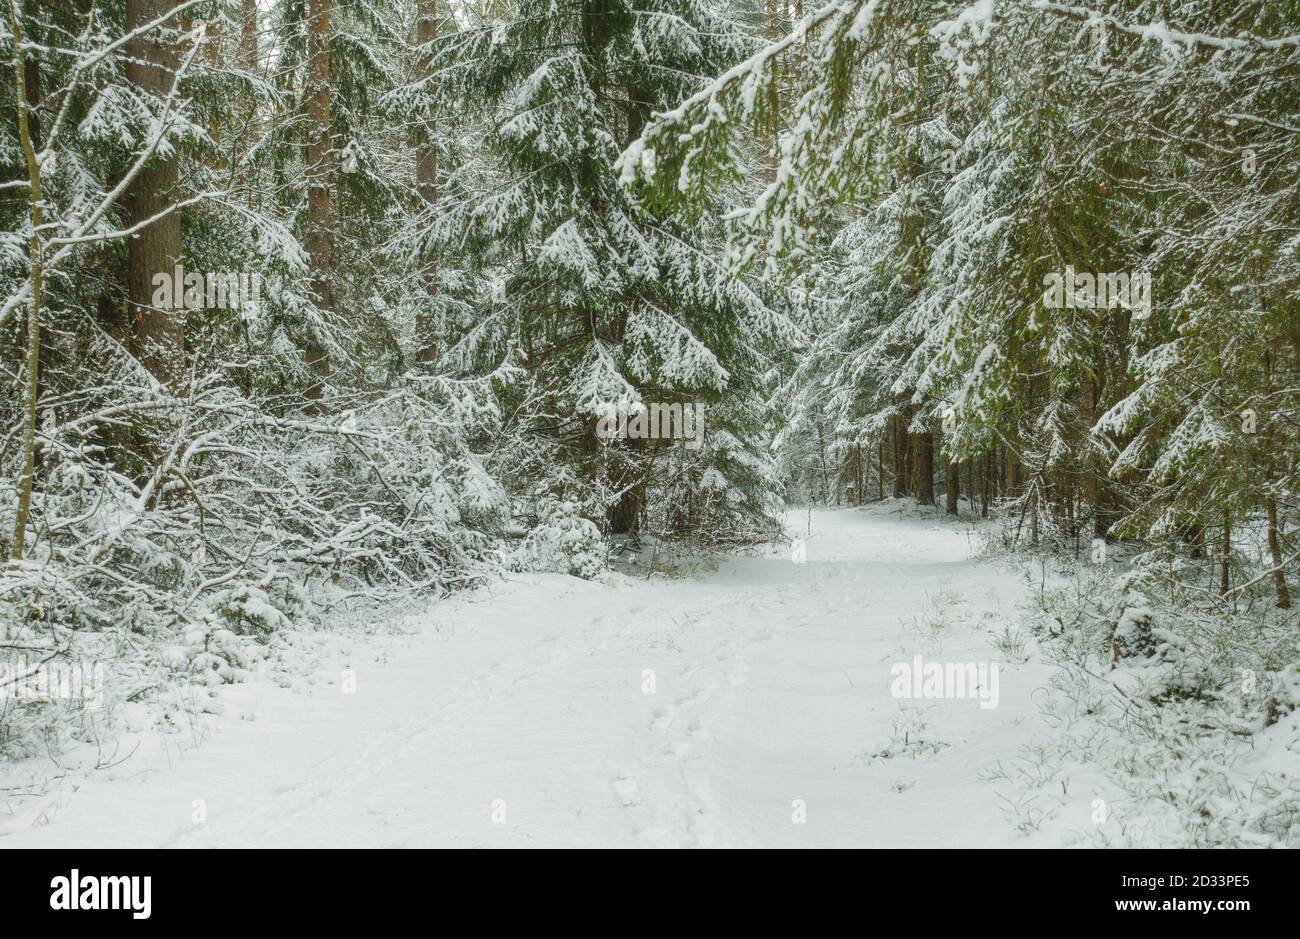 Road through beautiful winter forest, trees covered fresh white snow. Stock Photo